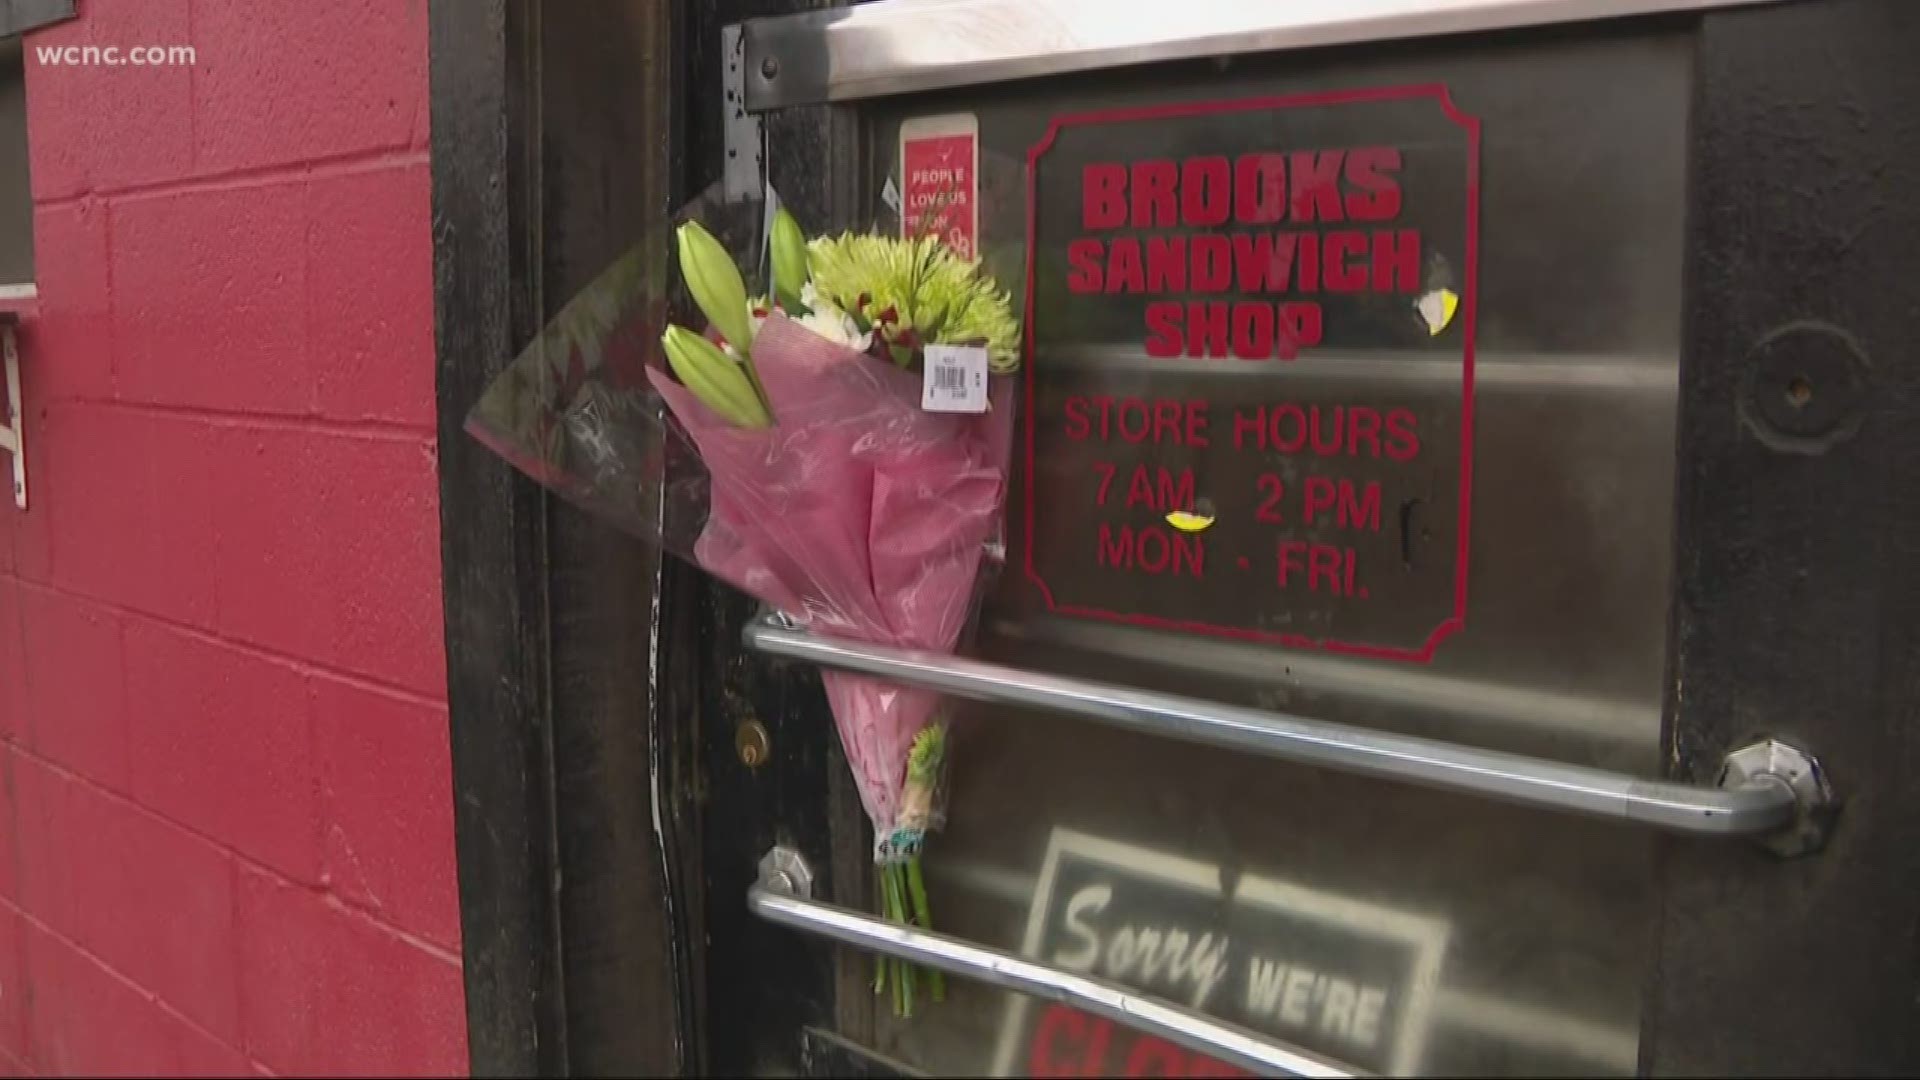 It happened early Monday morning at Brooks' Sandwich House on North Brevard street near North Davidson in NoDa.